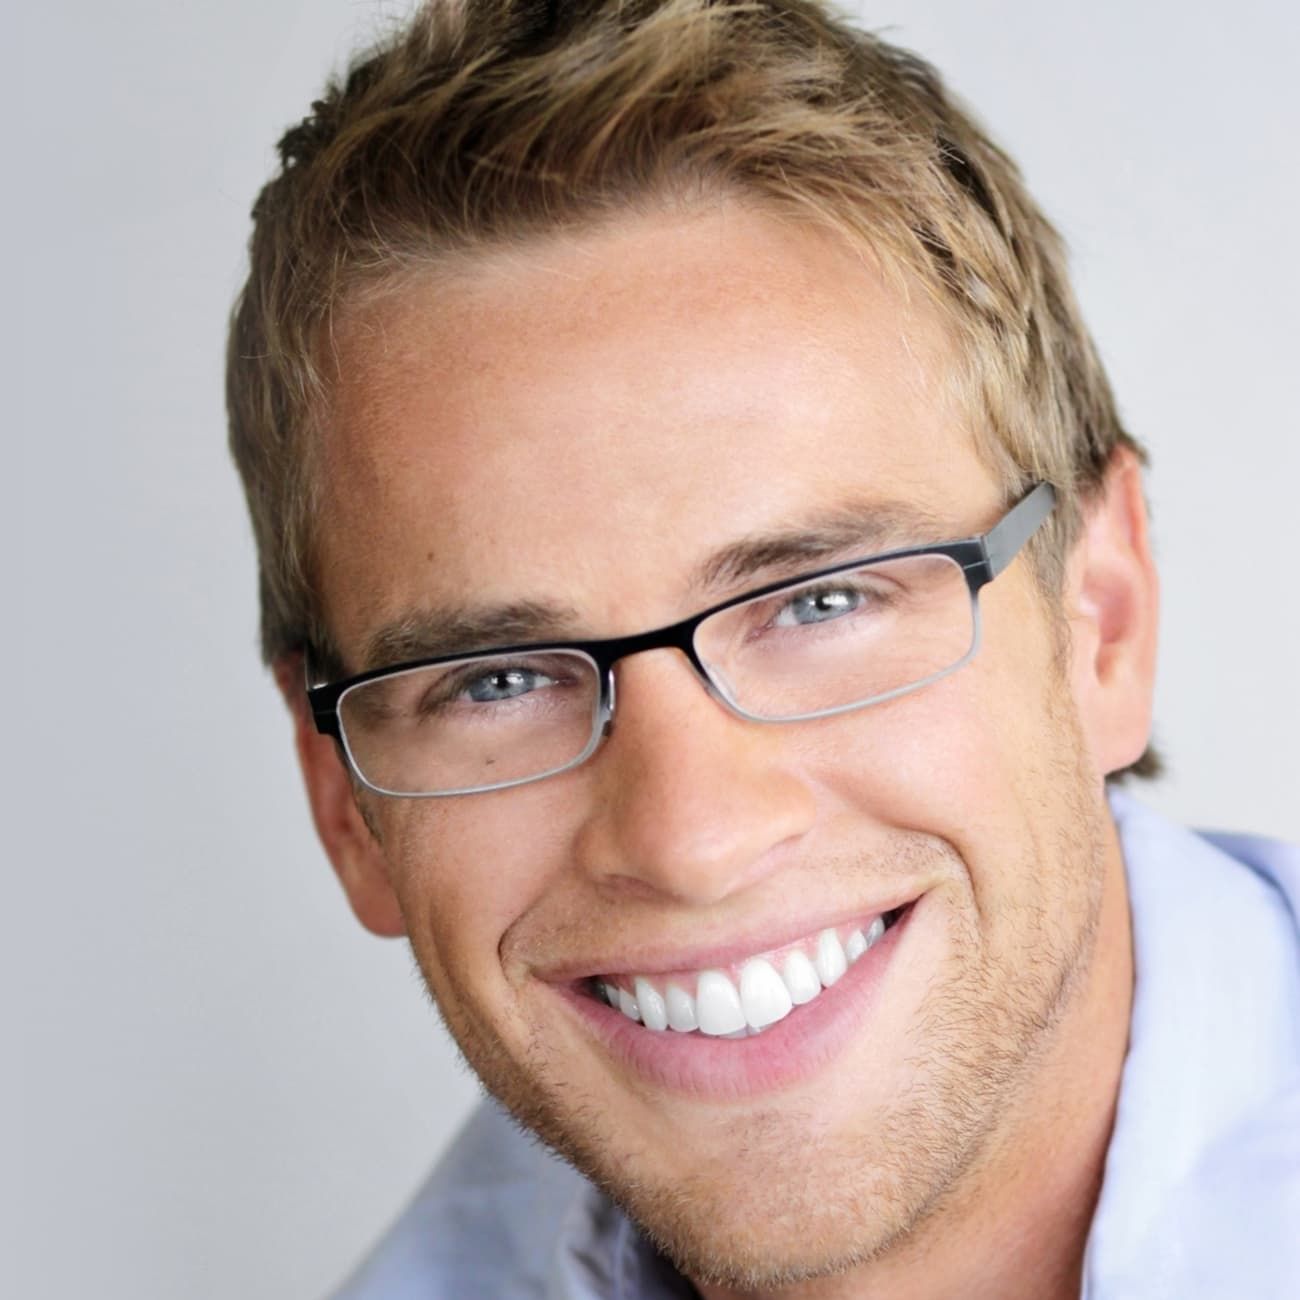 achieve a great smile with basalt dentistry cosmetic smiles